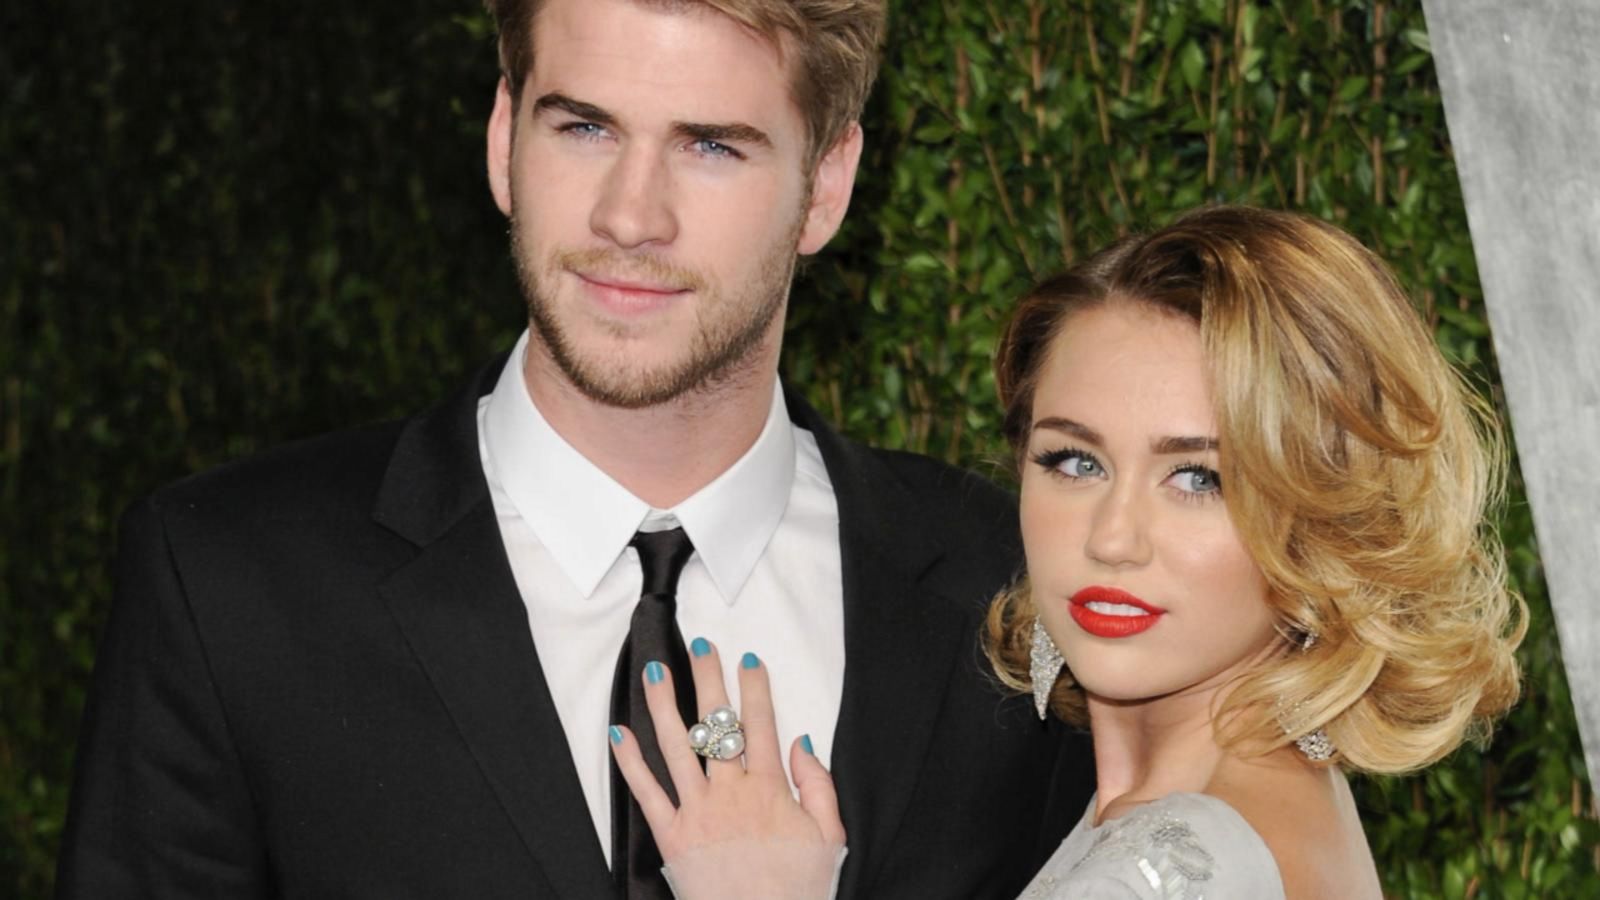 VIDEO: Miley Cyrus opens up about her divorce from Liam Hemsworth